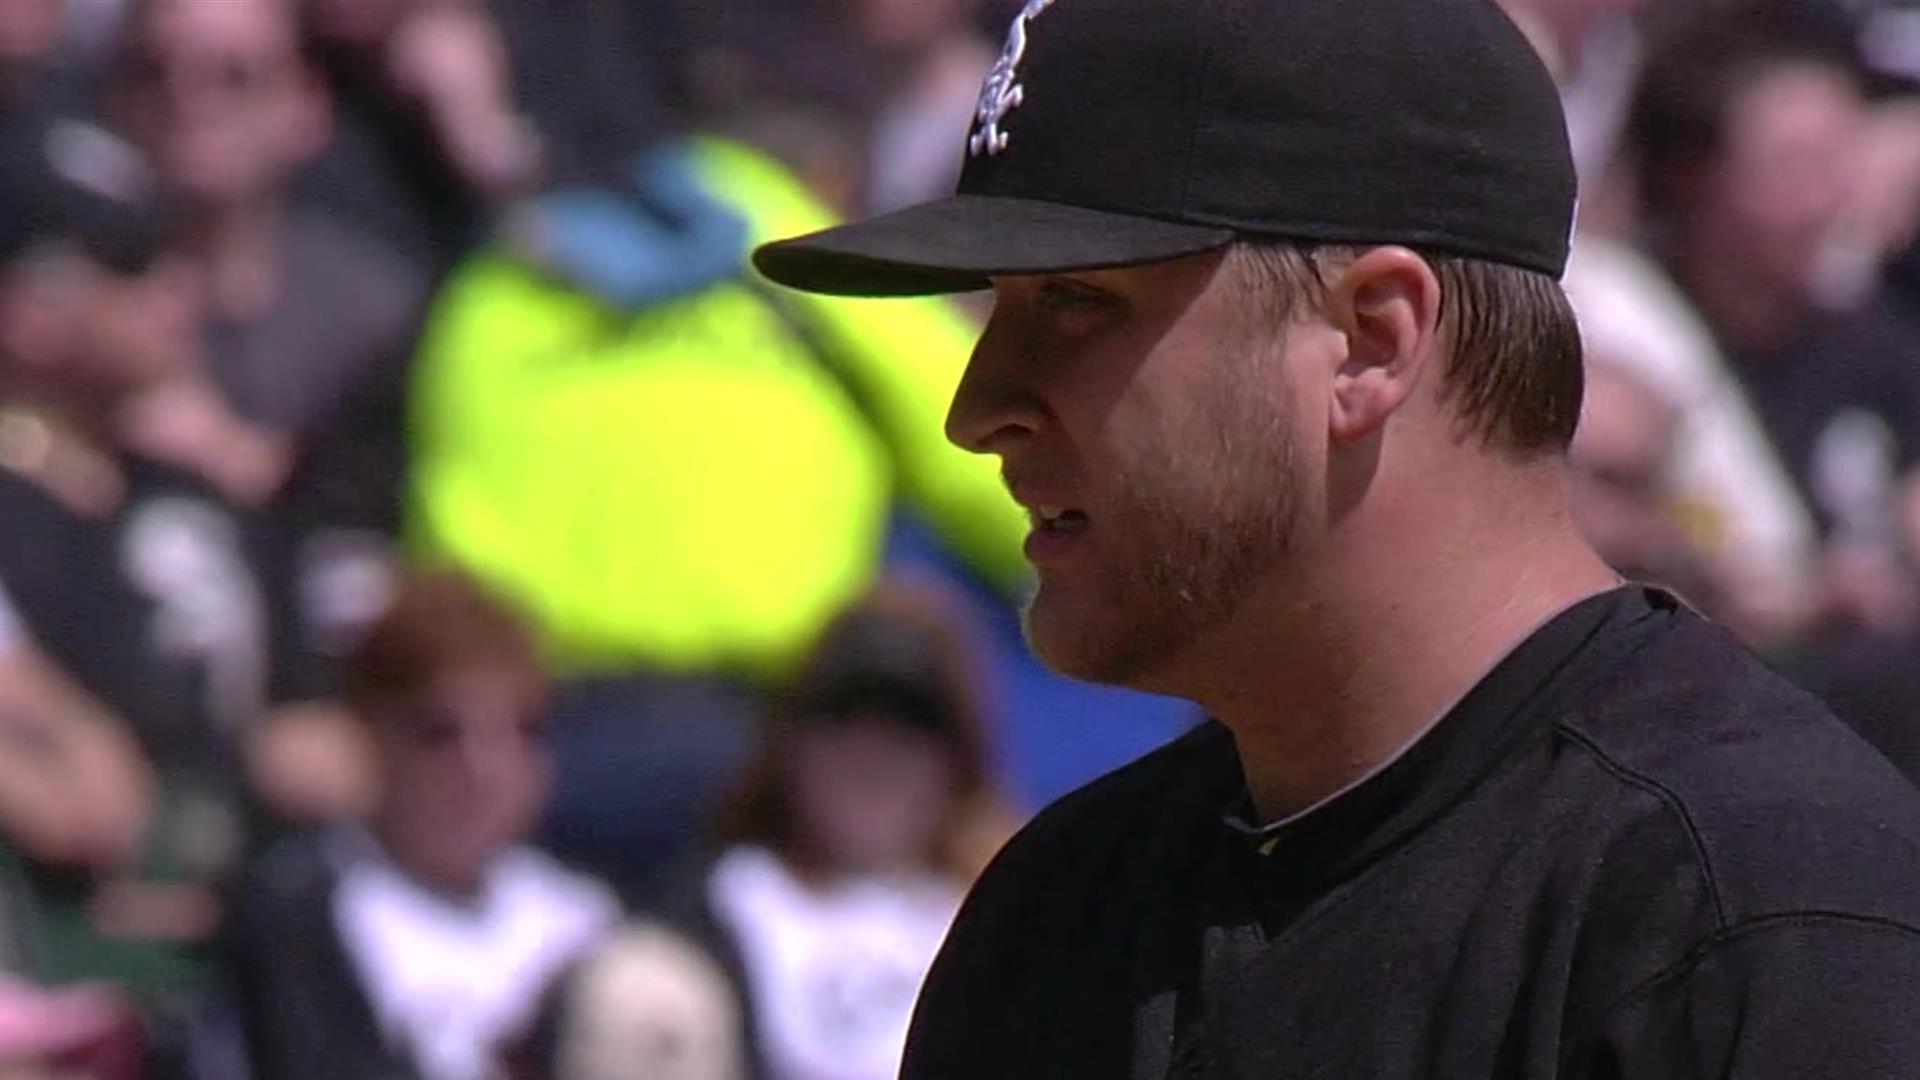 White Sox to retire soft-tossing Mark Buehrle's No. 56